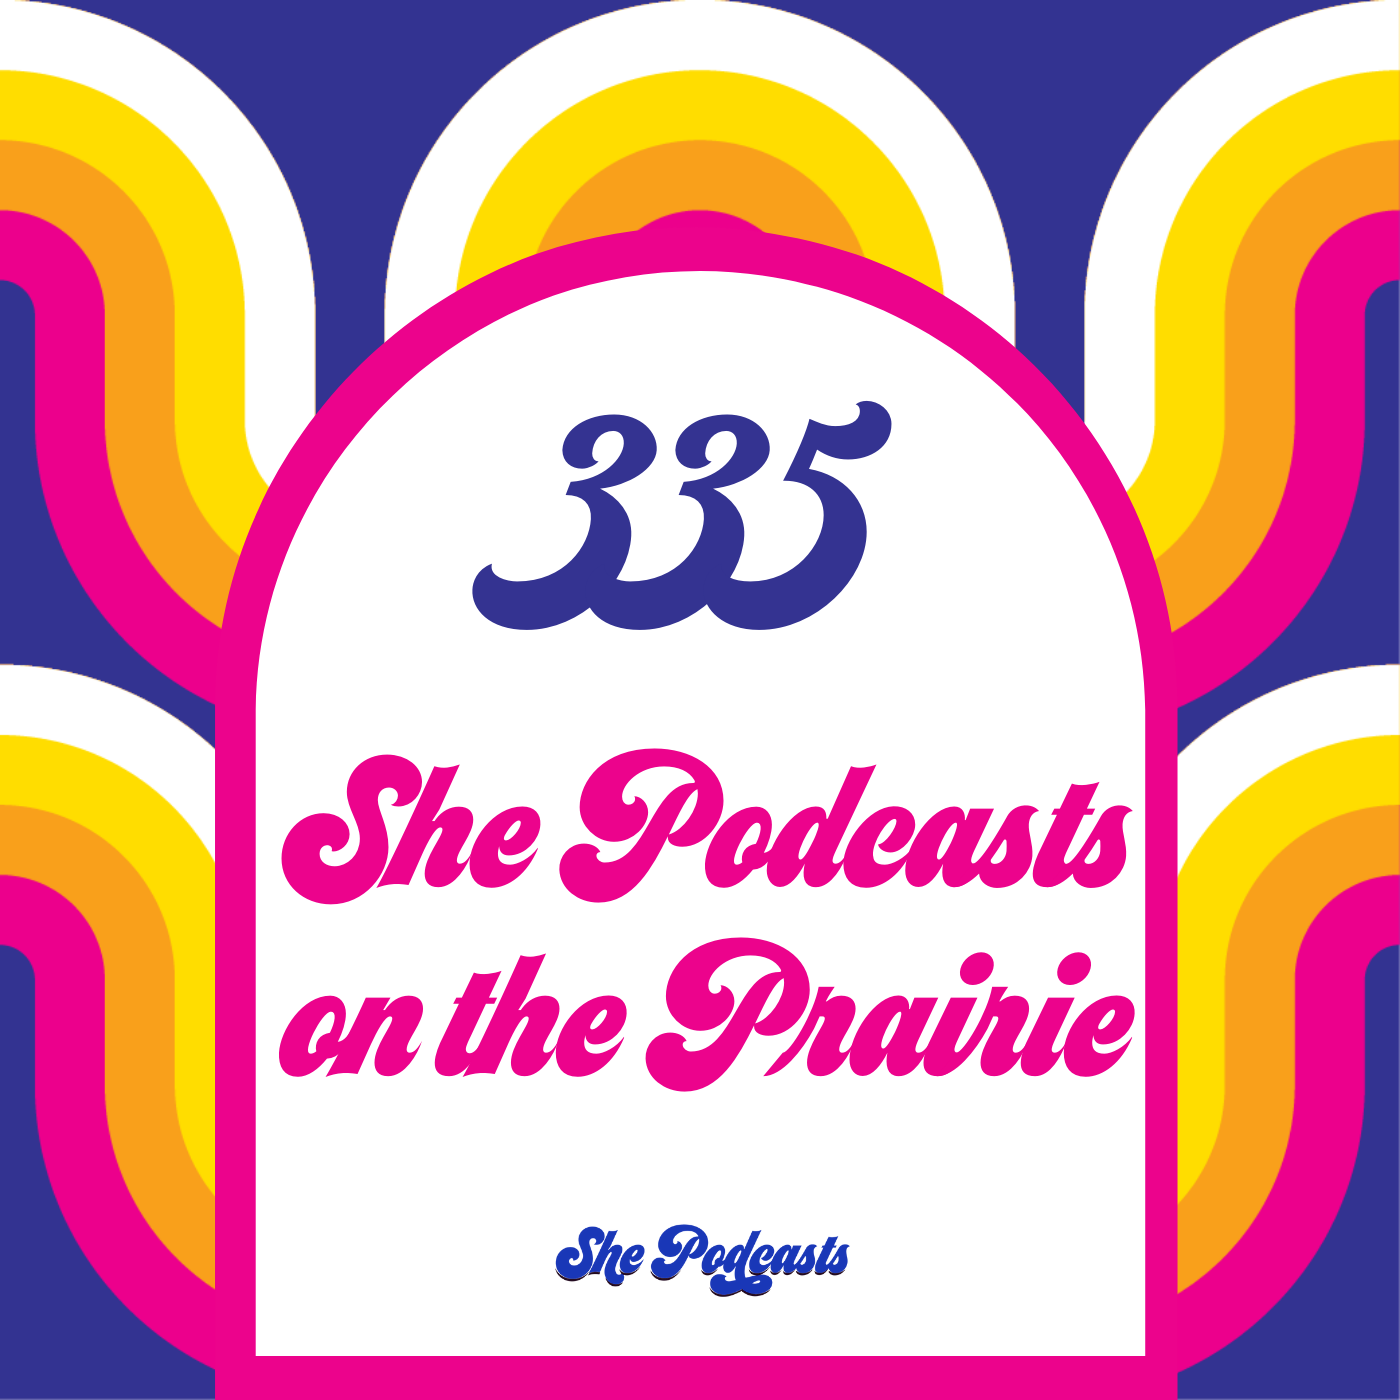 305 She Podcasts on the Prairie